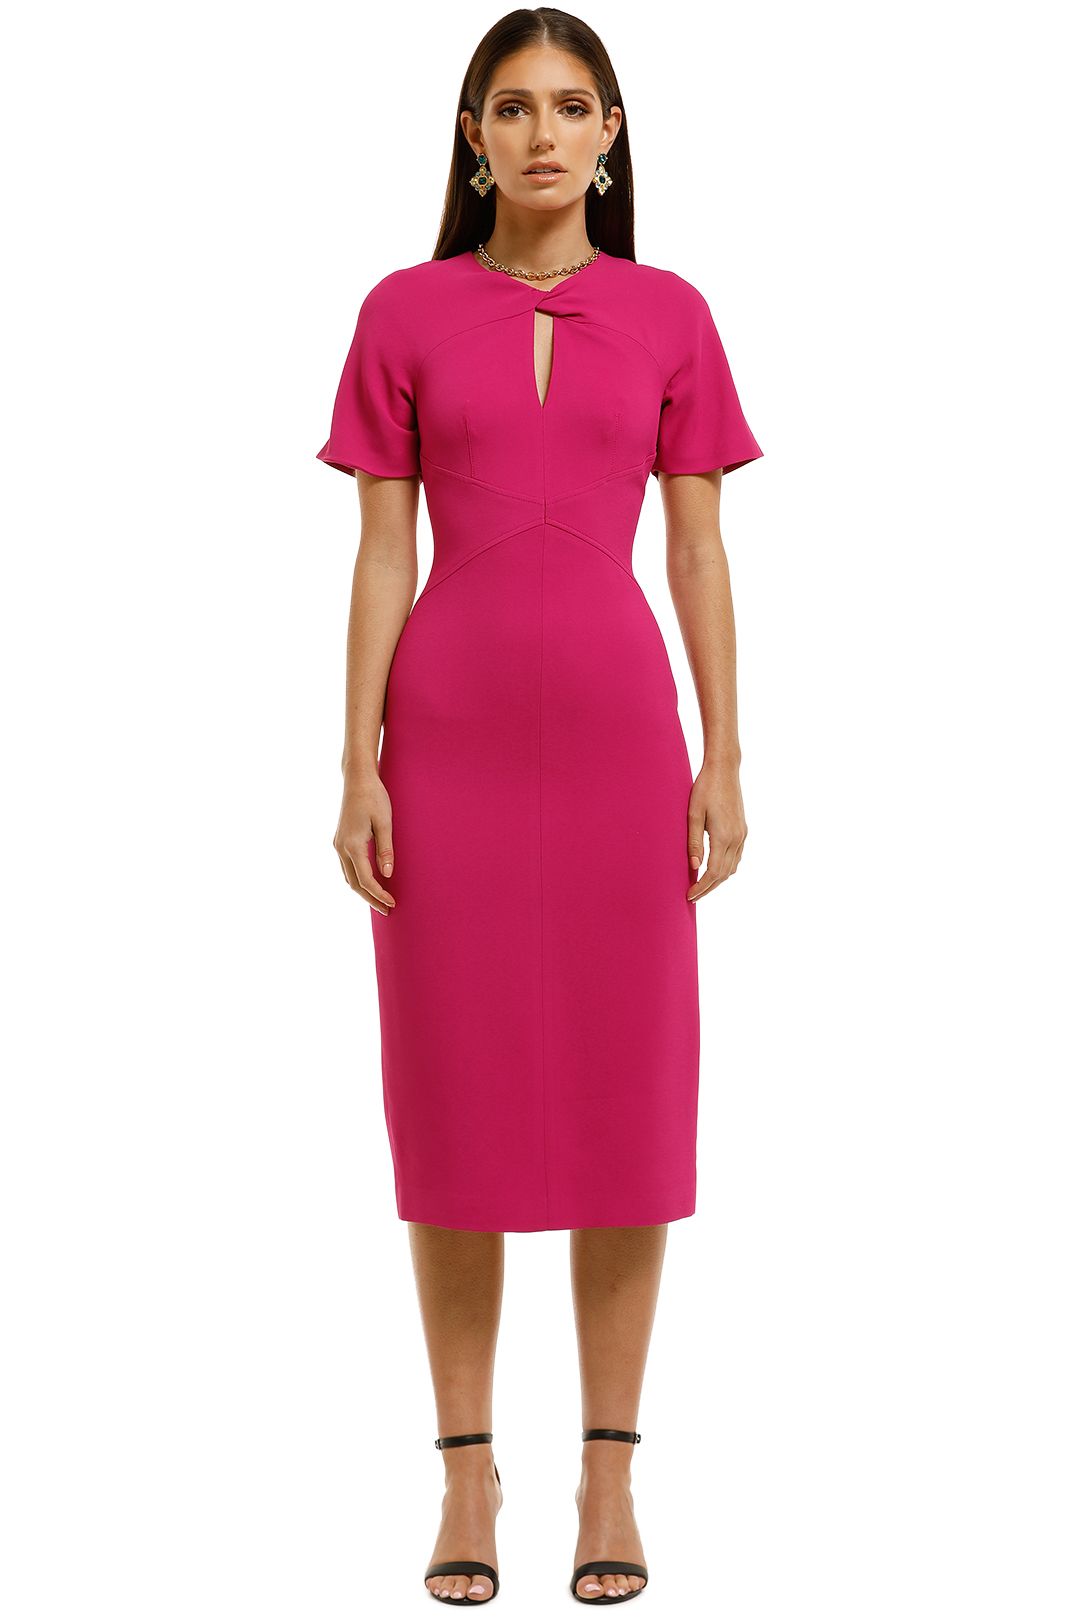 Ginger-and-Smart-Advocate-Fitted-Dress-Fuschia-Front